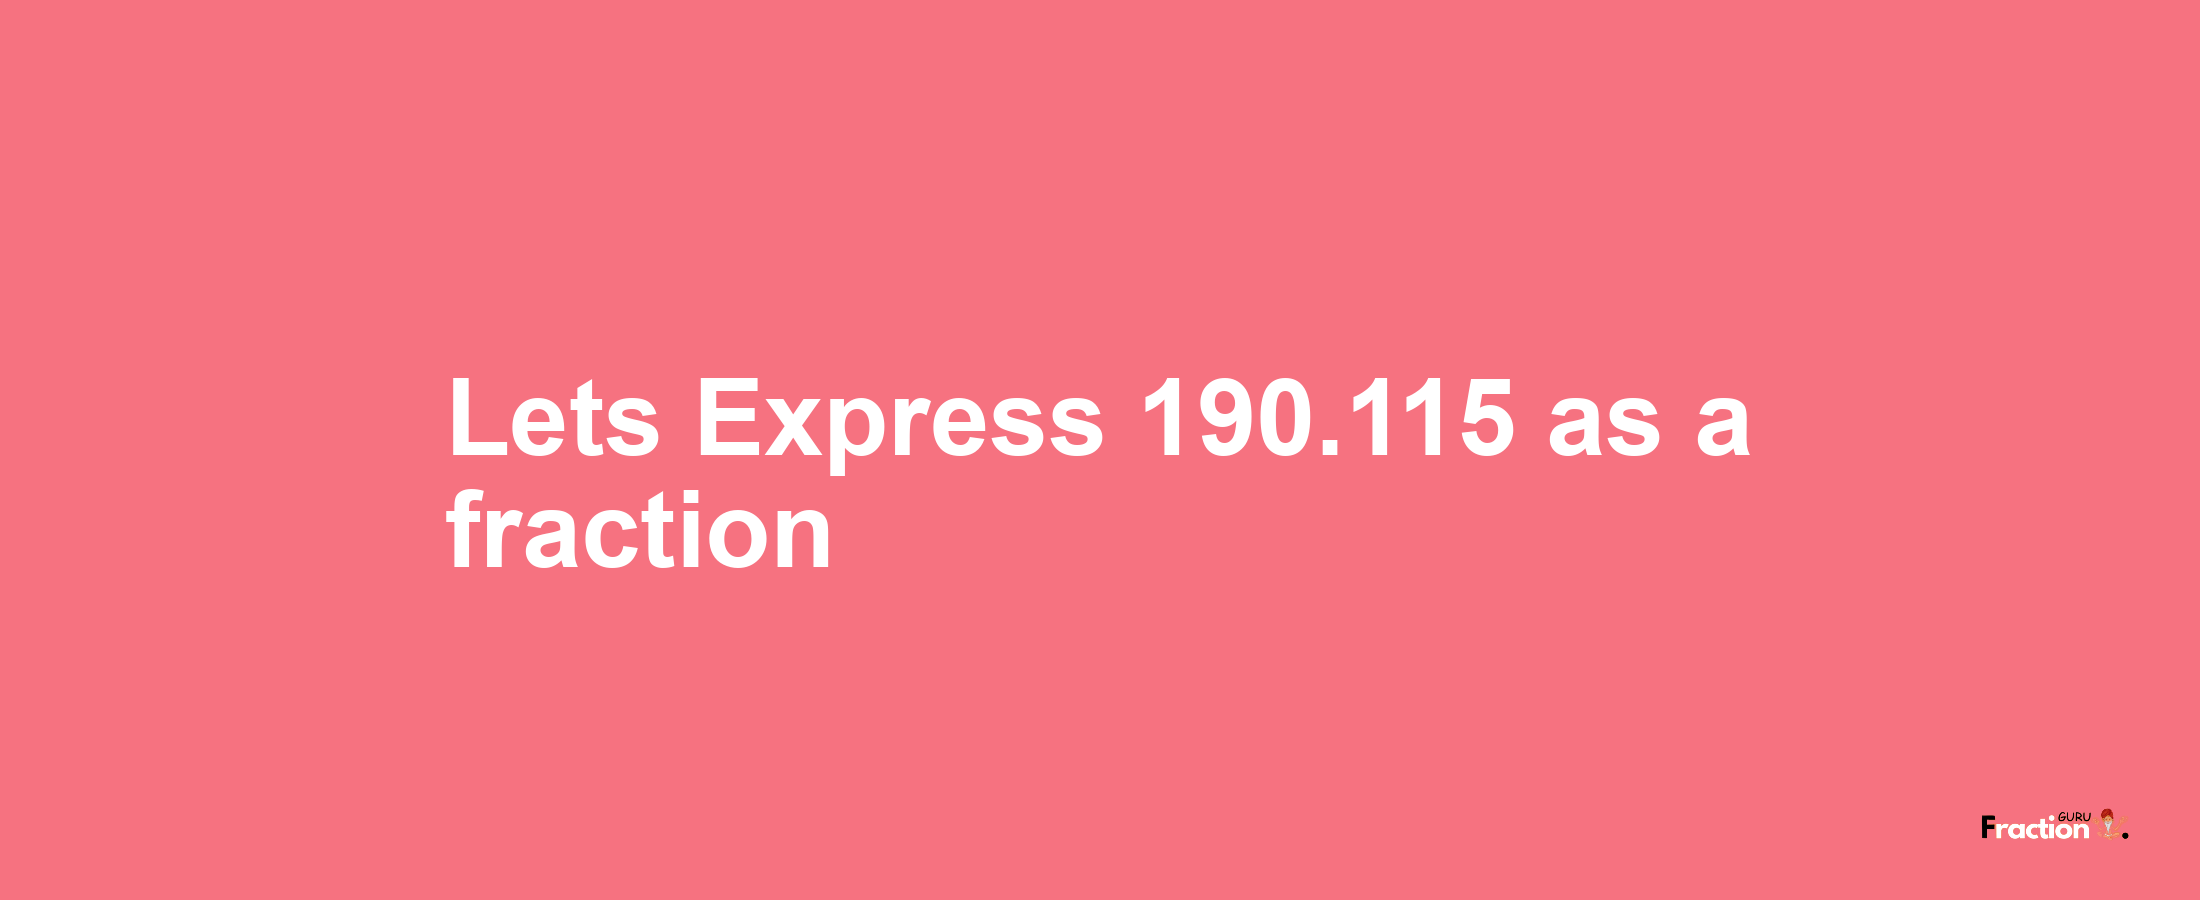 Lets Express 190.115 as afraction